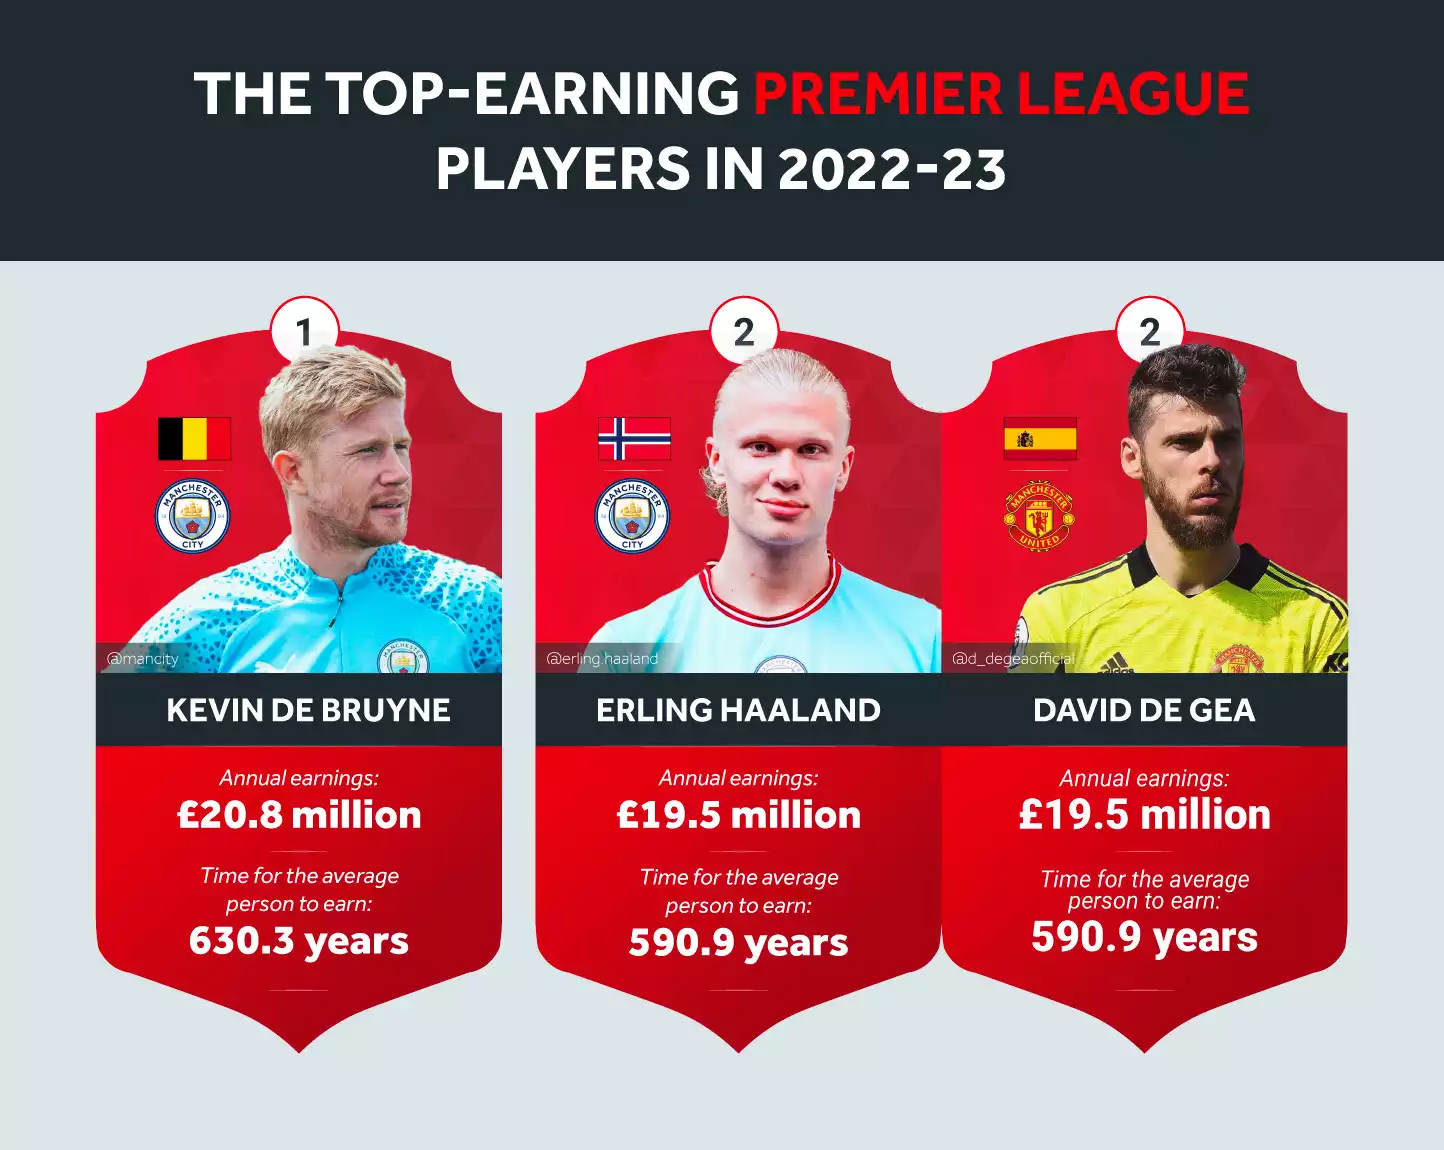 Top 3 Earning Premier League Players